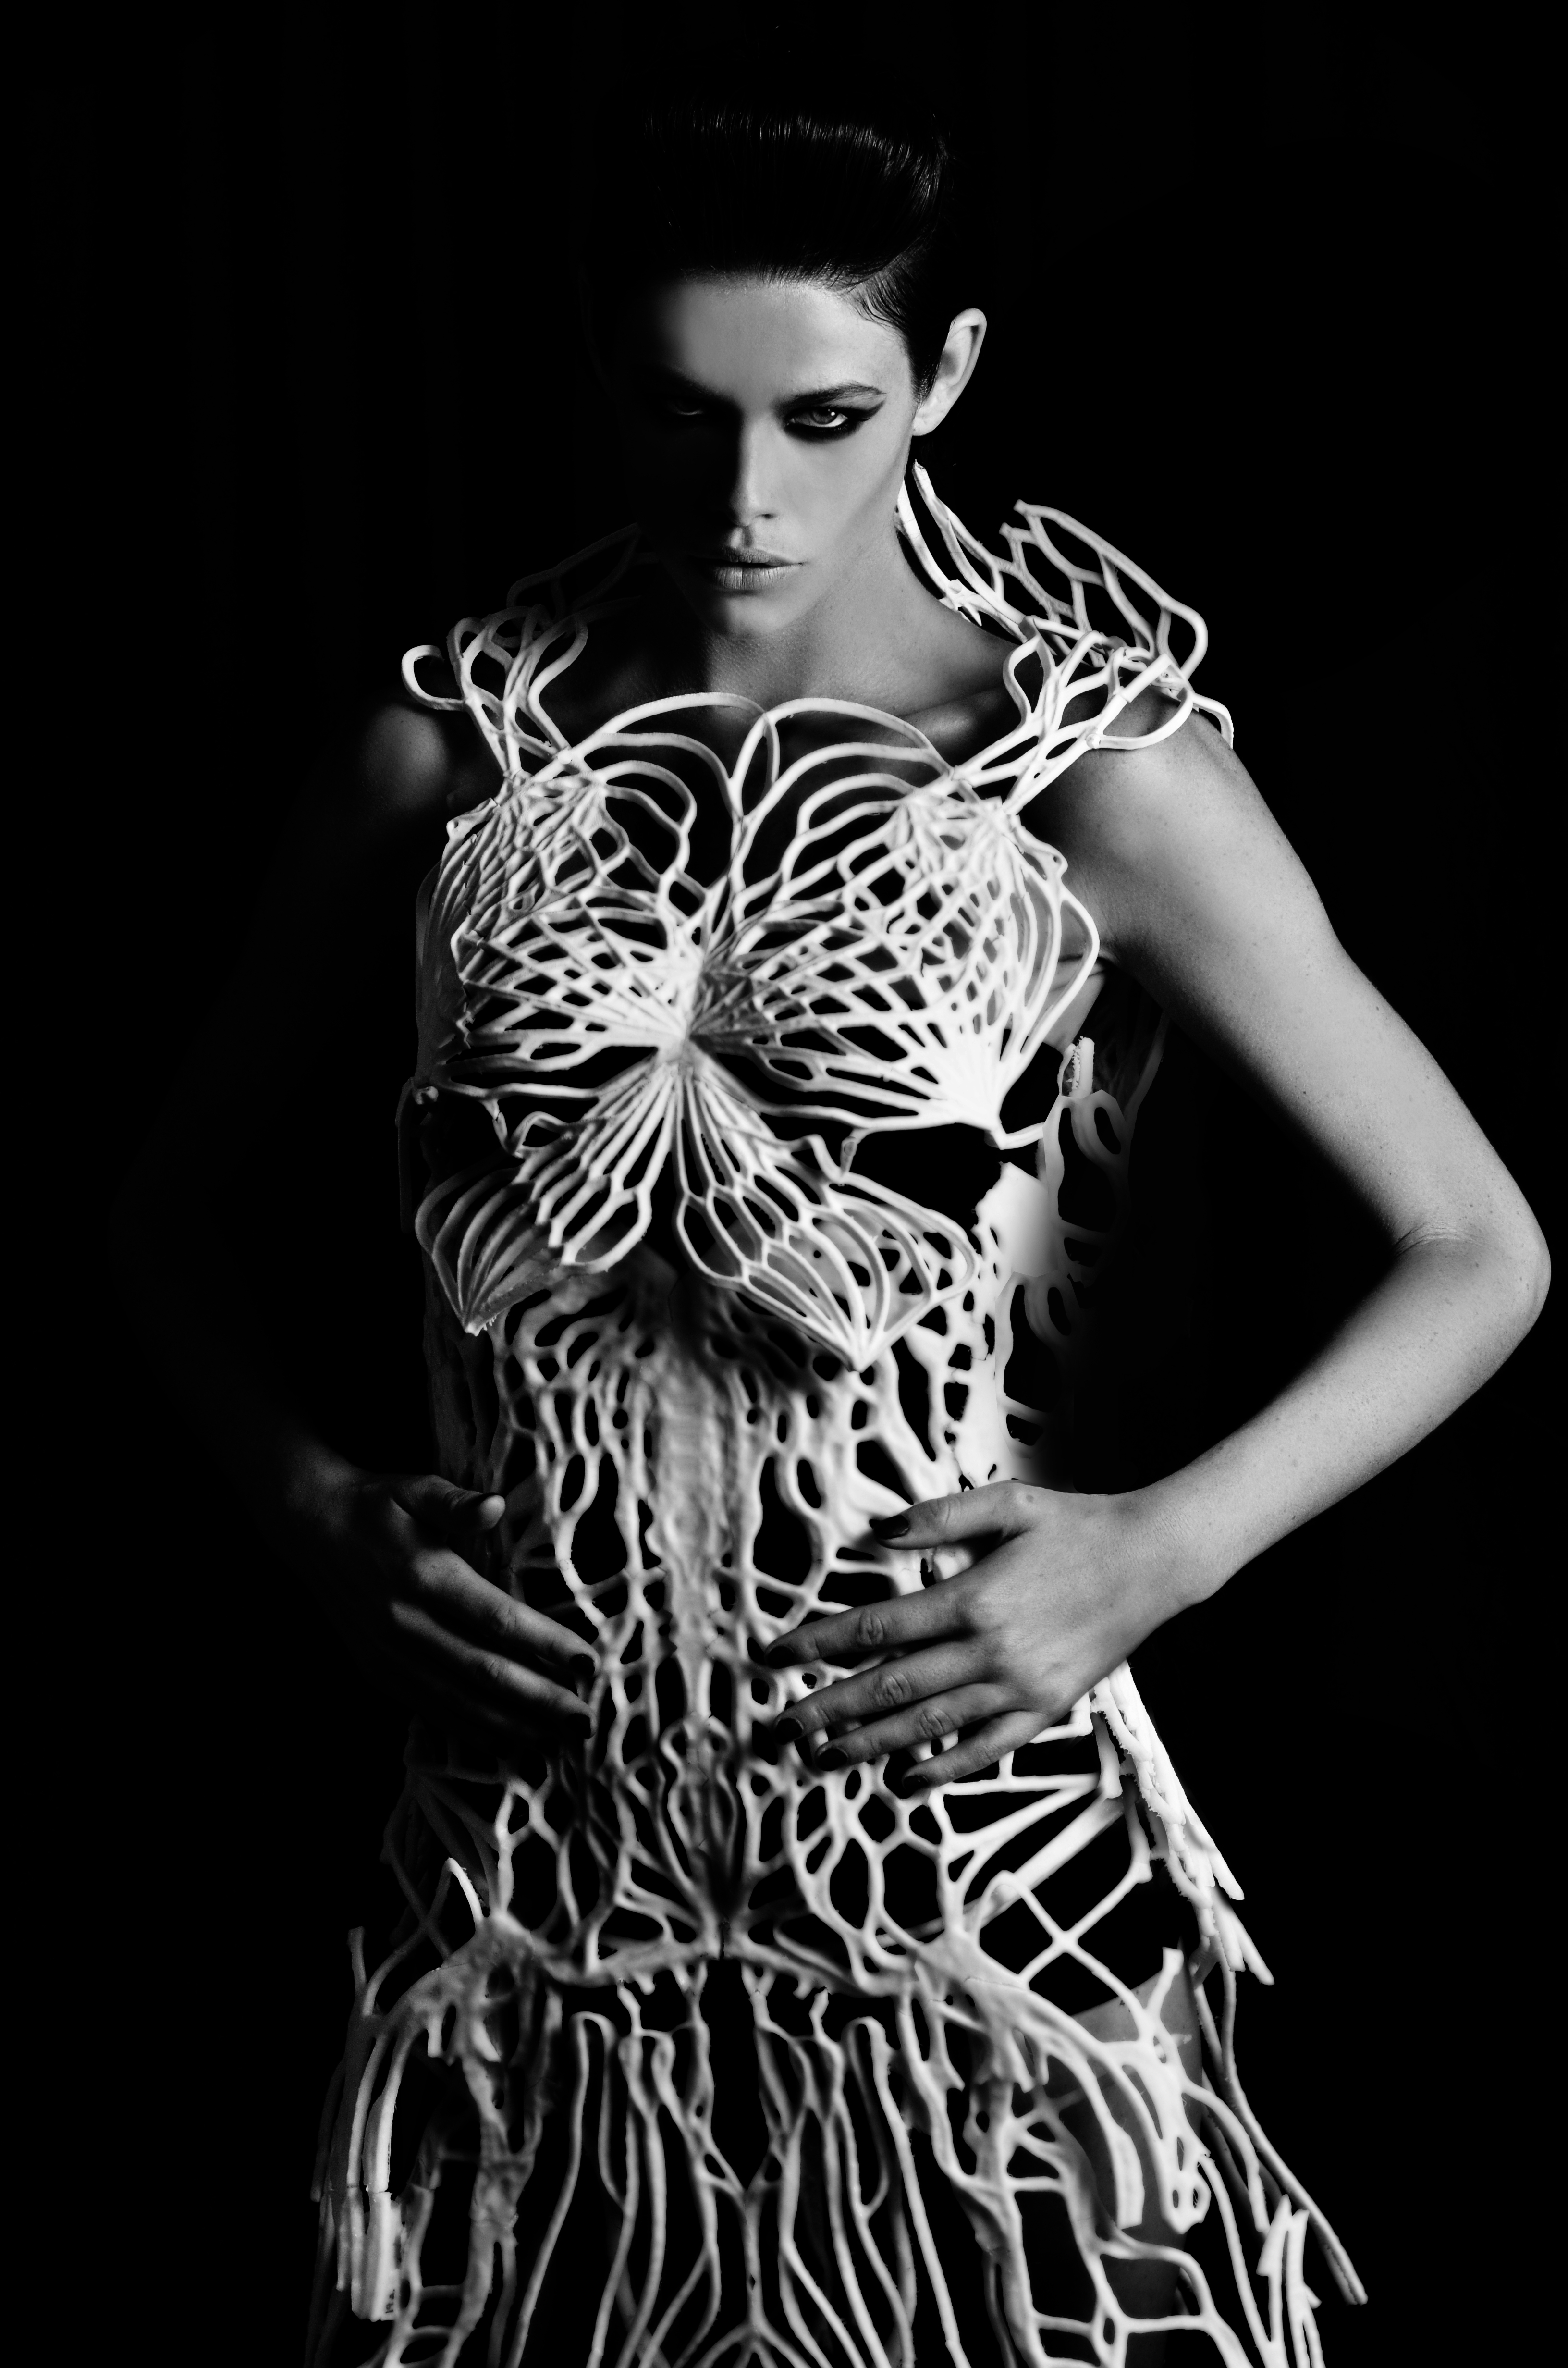 Verlan Dress from New Skins with Francis Bitonti Studio by MakerBot. Photo credit Christini.